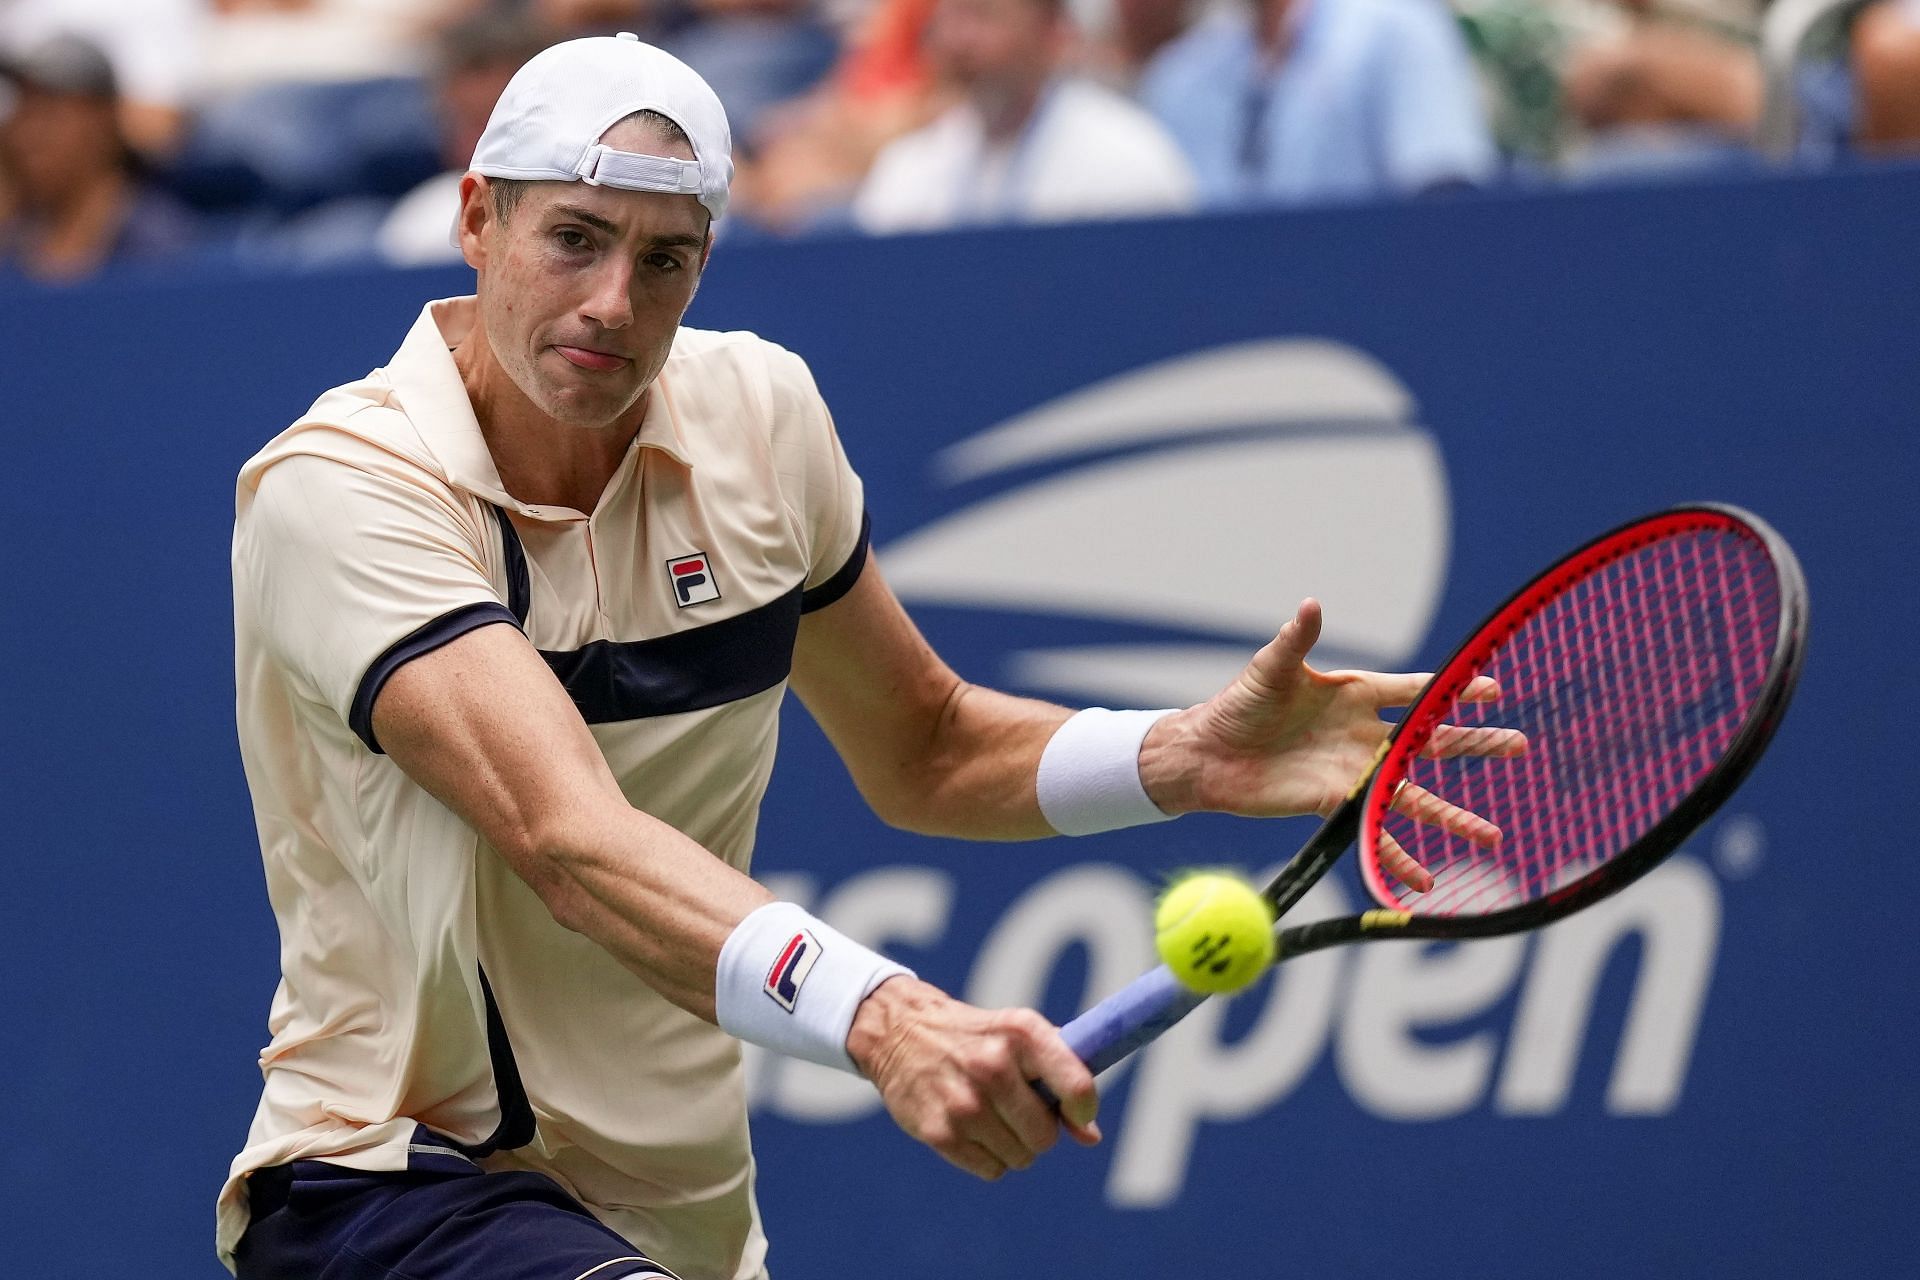 US Open 2023 Michael Mmoh vs John Isner preview, head-to-head, prediction, odds, and pick